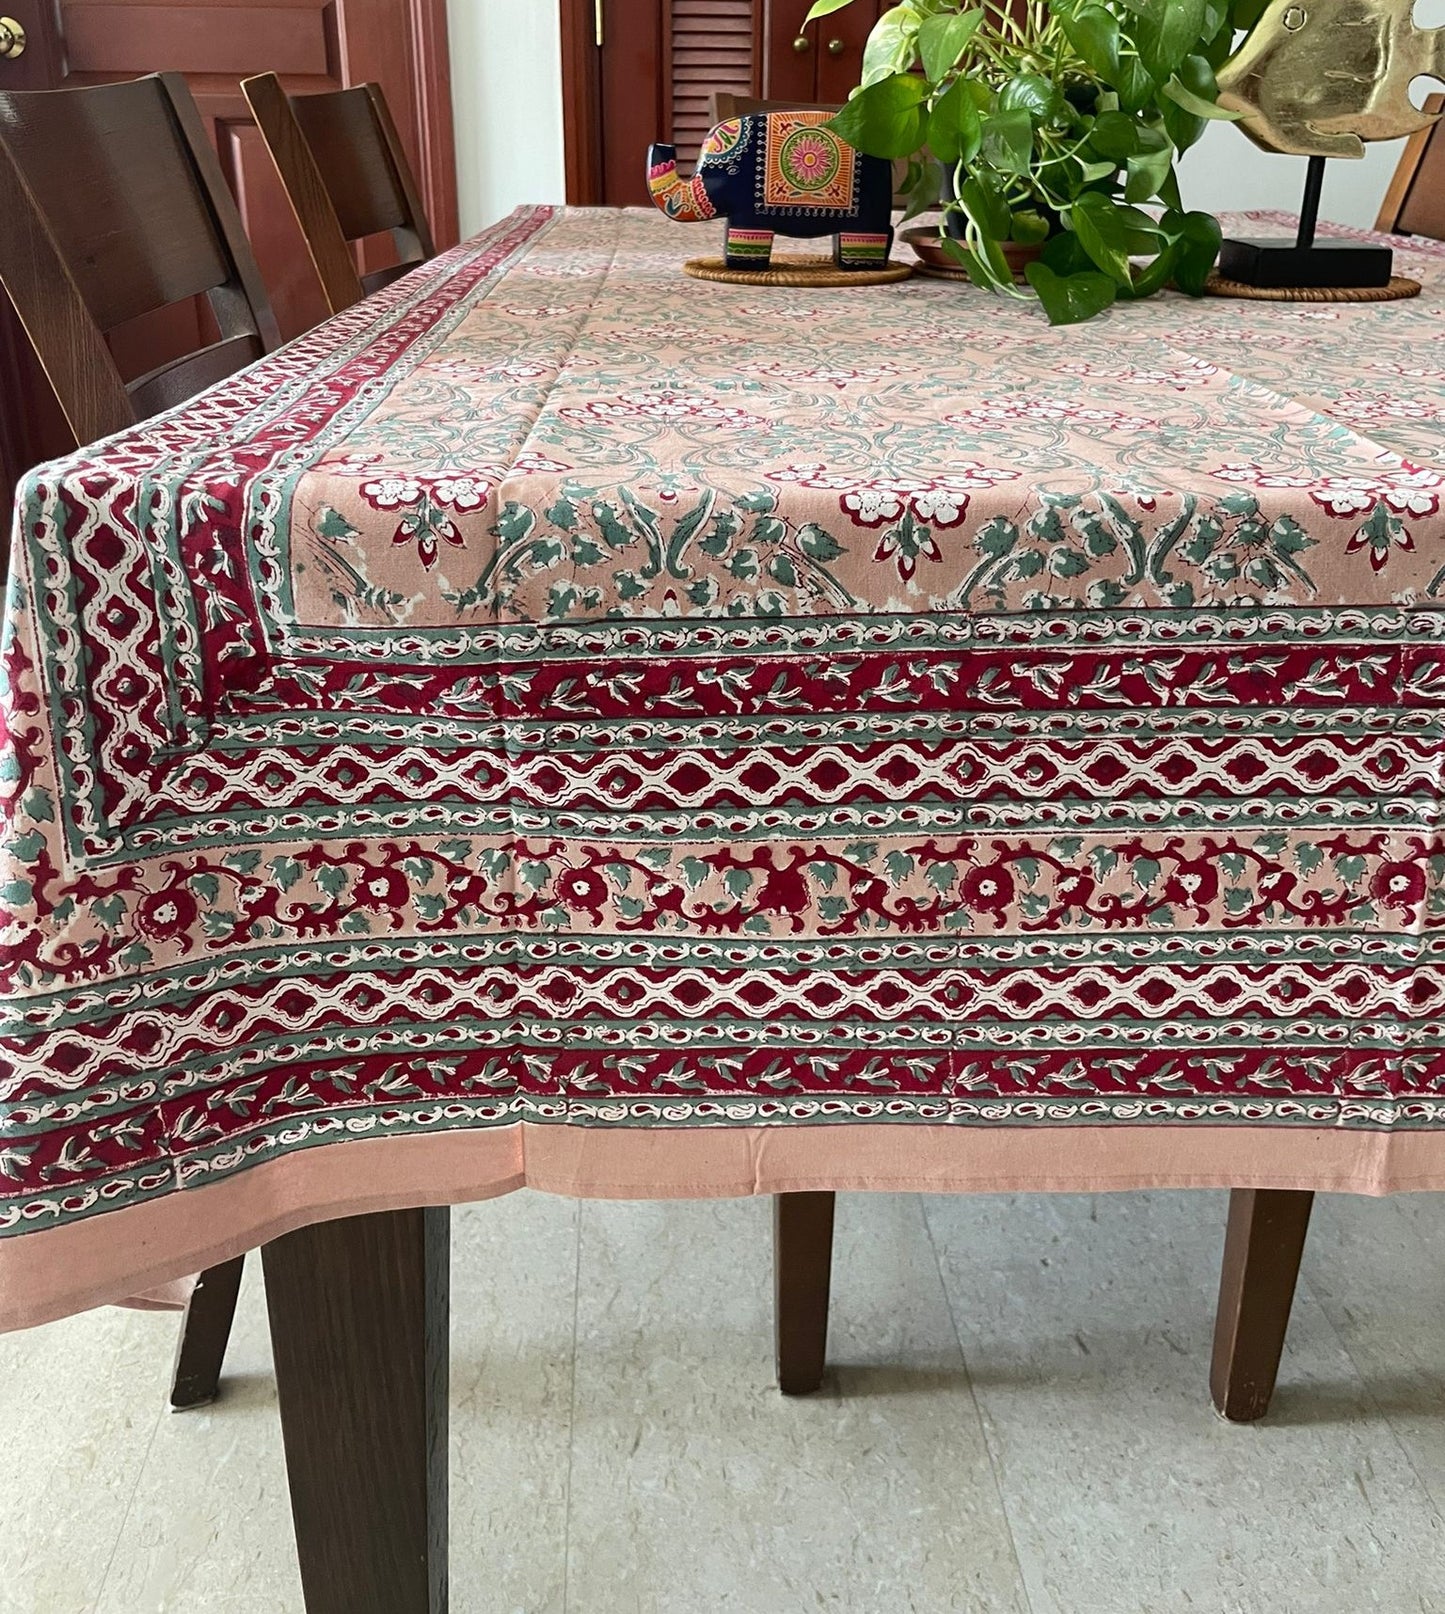 high quality and colorful table cover for women, buy now in Singapore